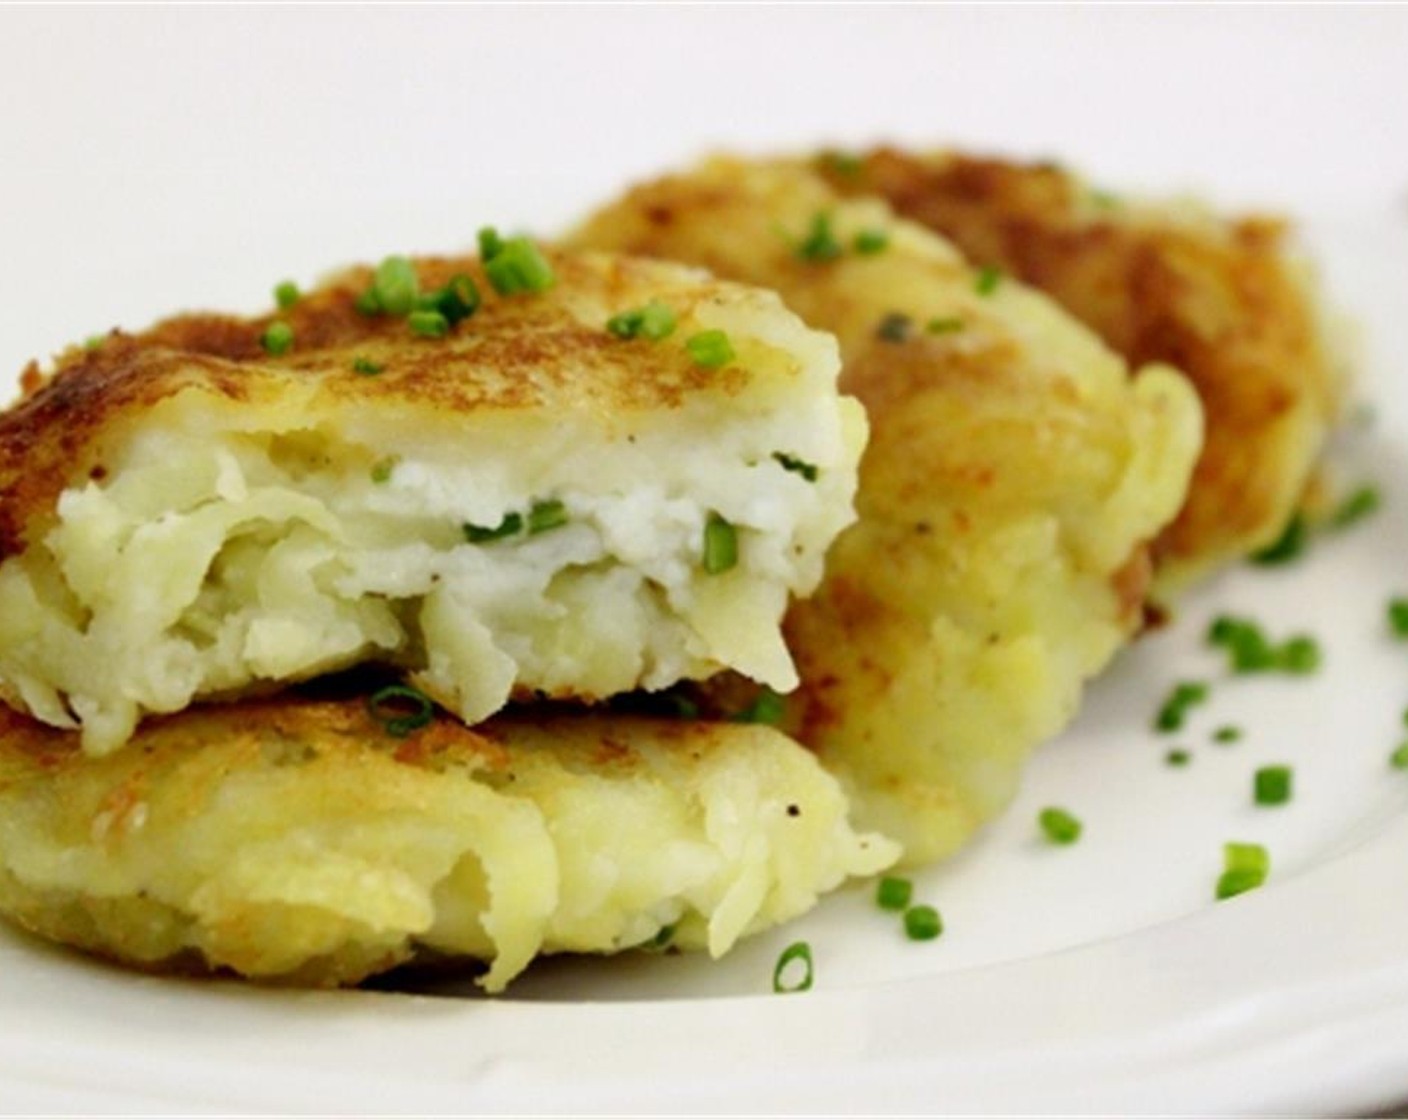 step 8 Drain the potato cakes on paper towels. Serve warm and enjoy!